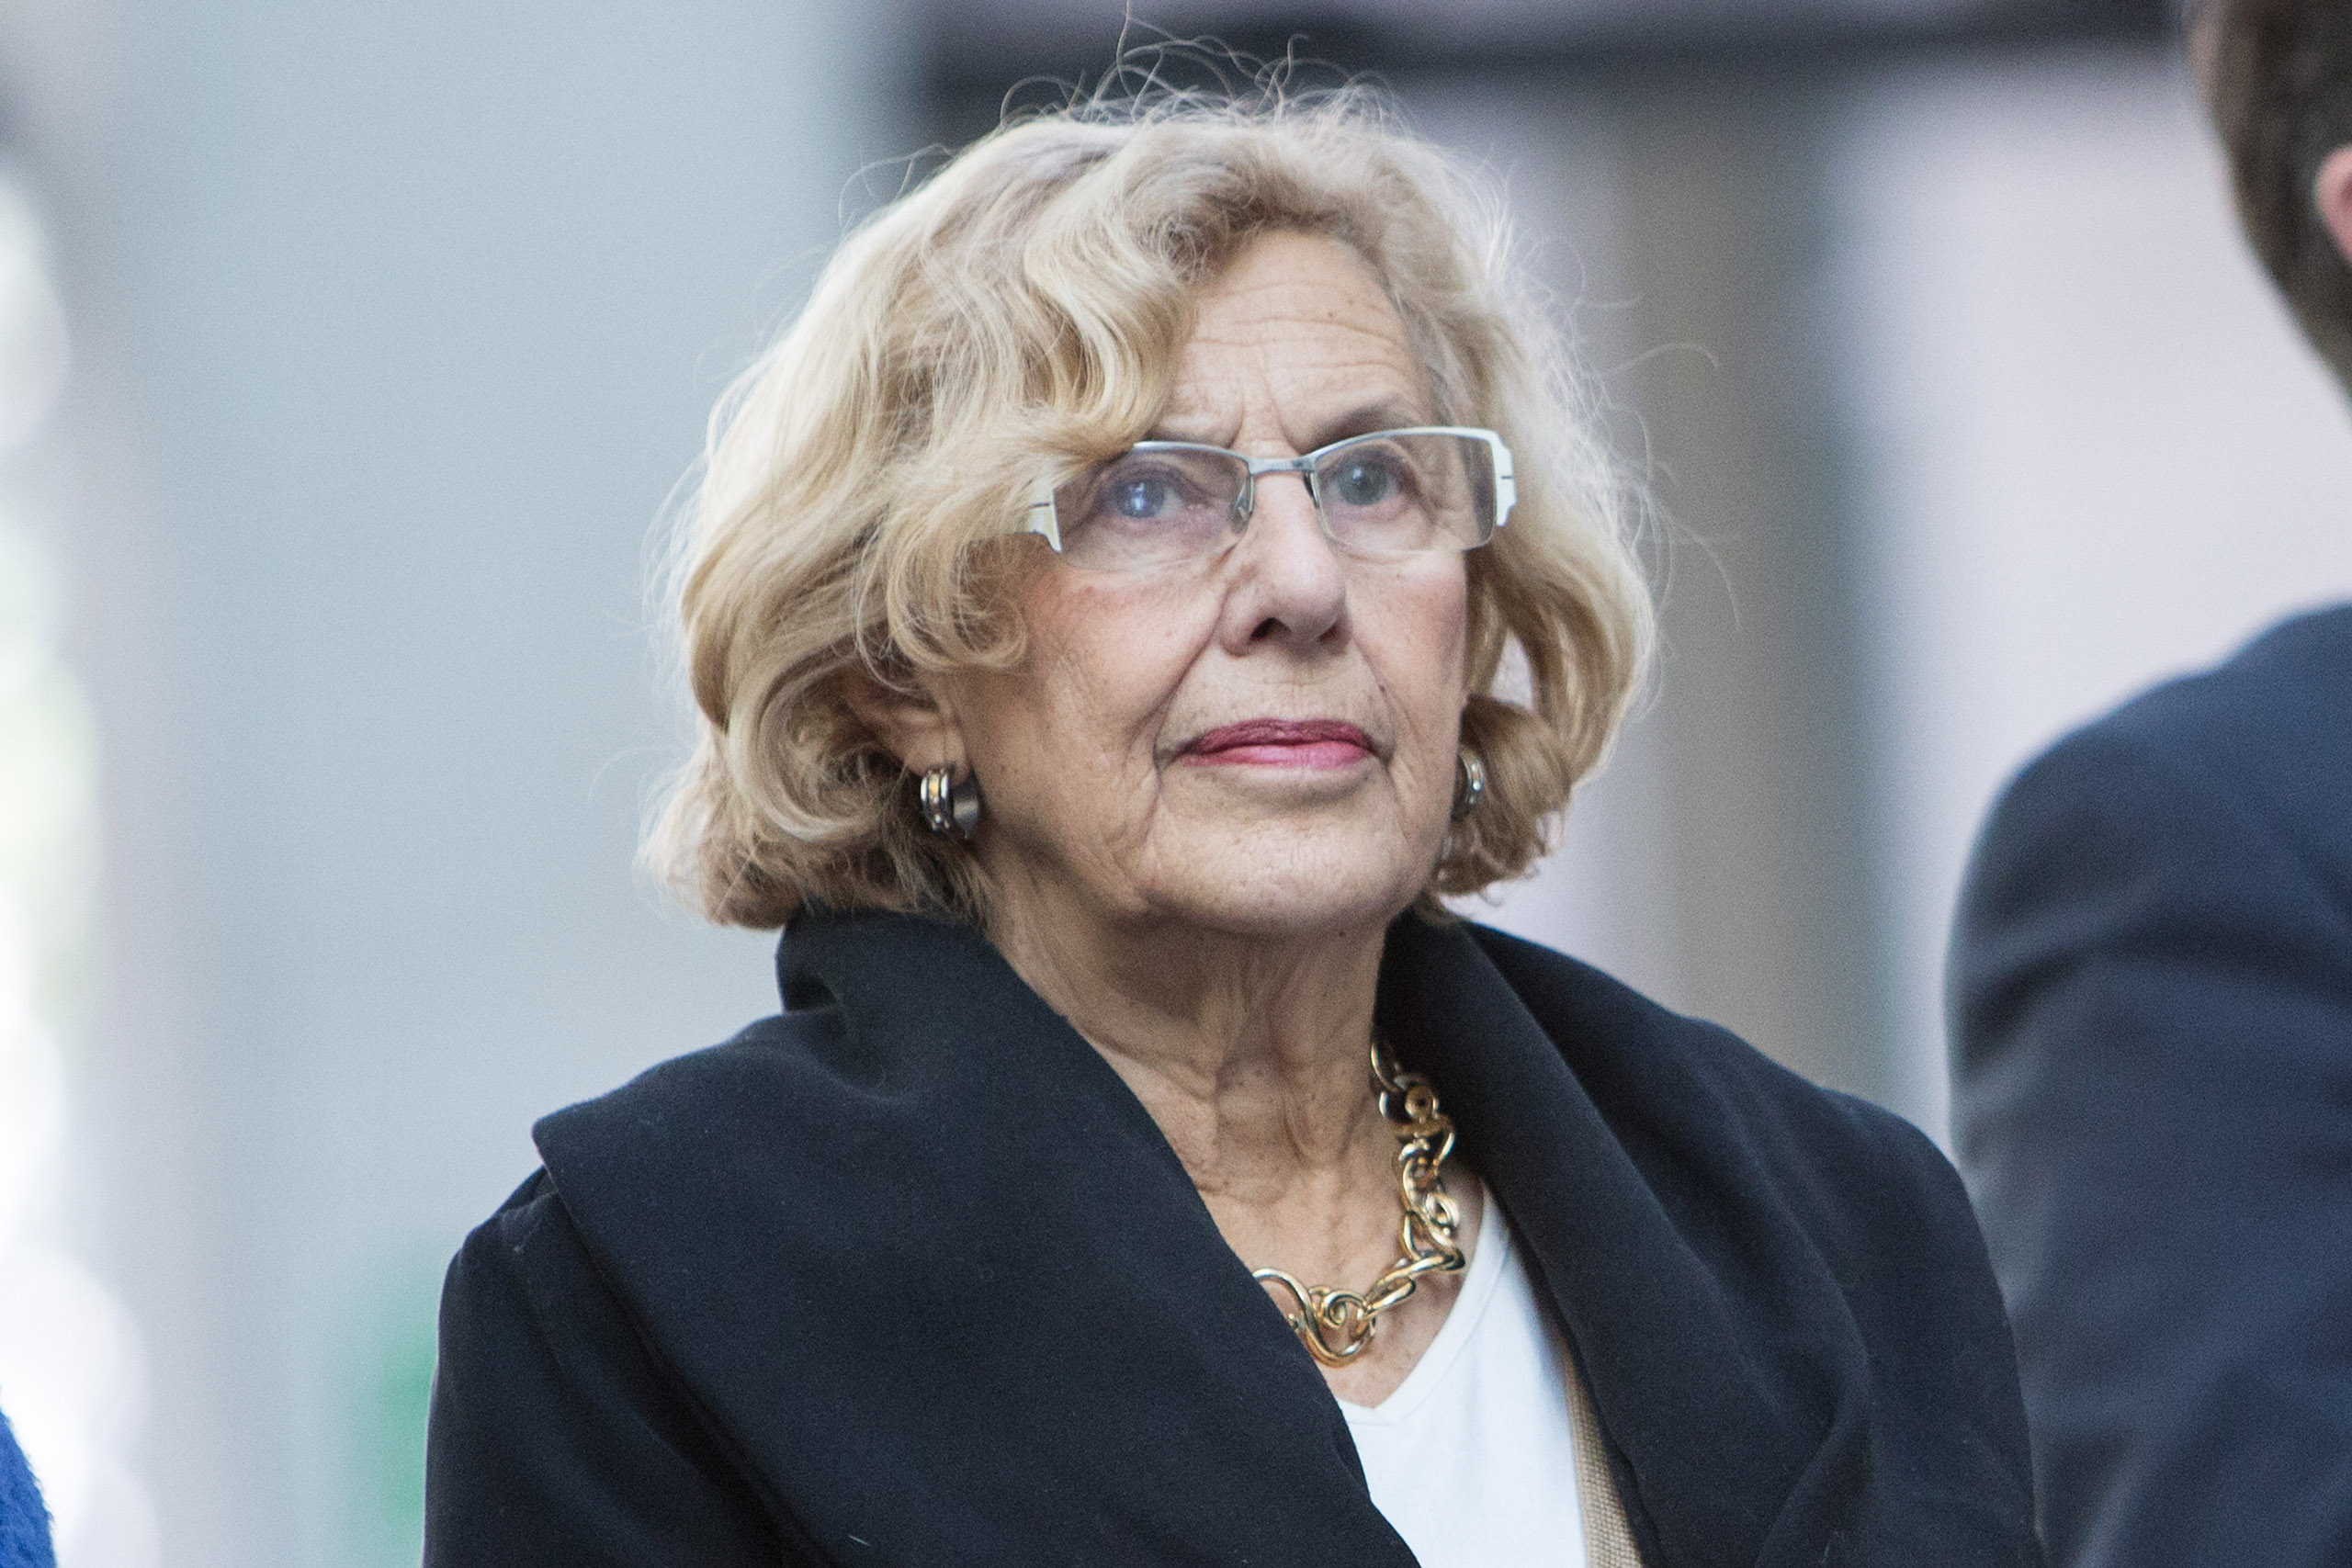 Manuela Carmena  attends a meeting at Cibeles Palace in Madrid, Spain on Nov. 23, 2015. (Pablo Cuadra—Getty Images)